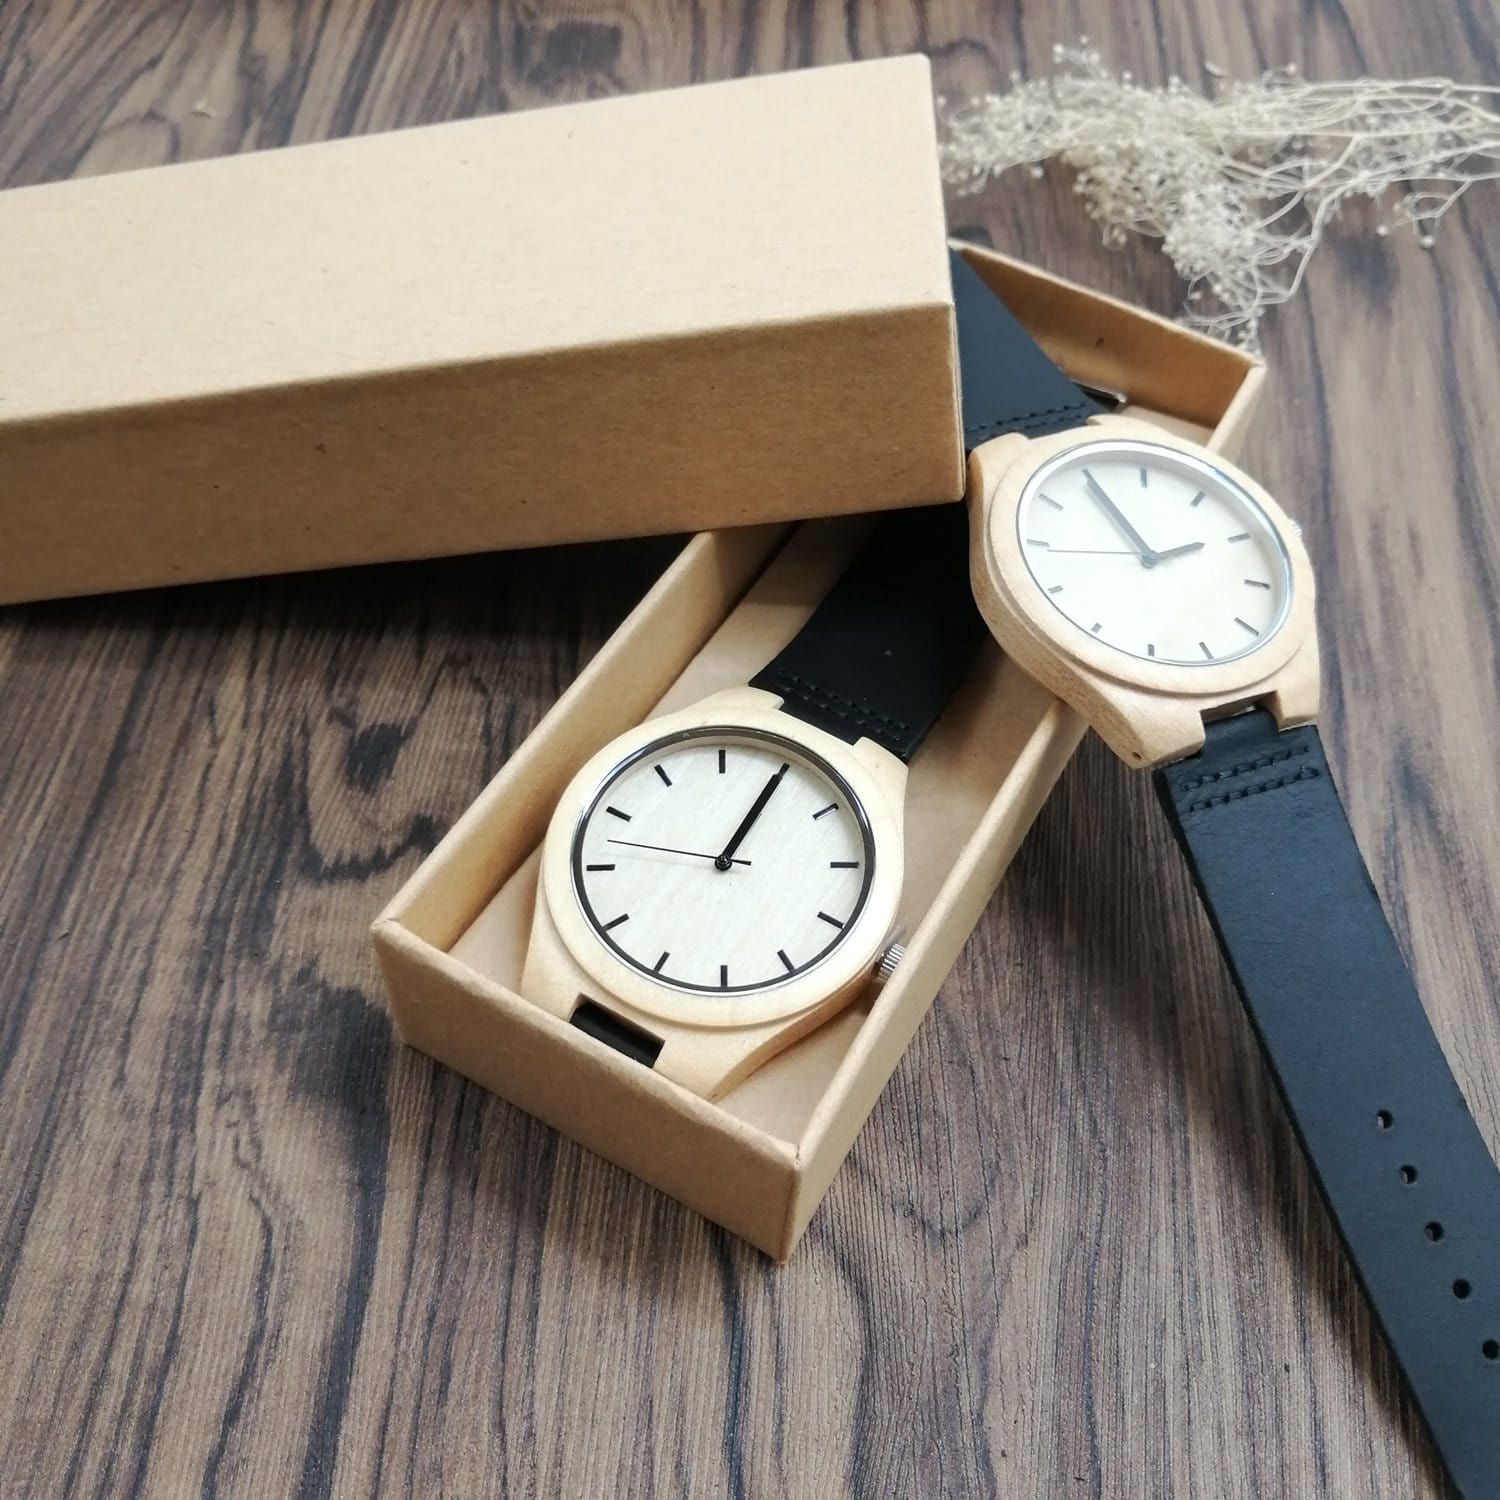 Watches To My Husband - I Can't Wait Engraved Wood Watch GiveMe-Gifts